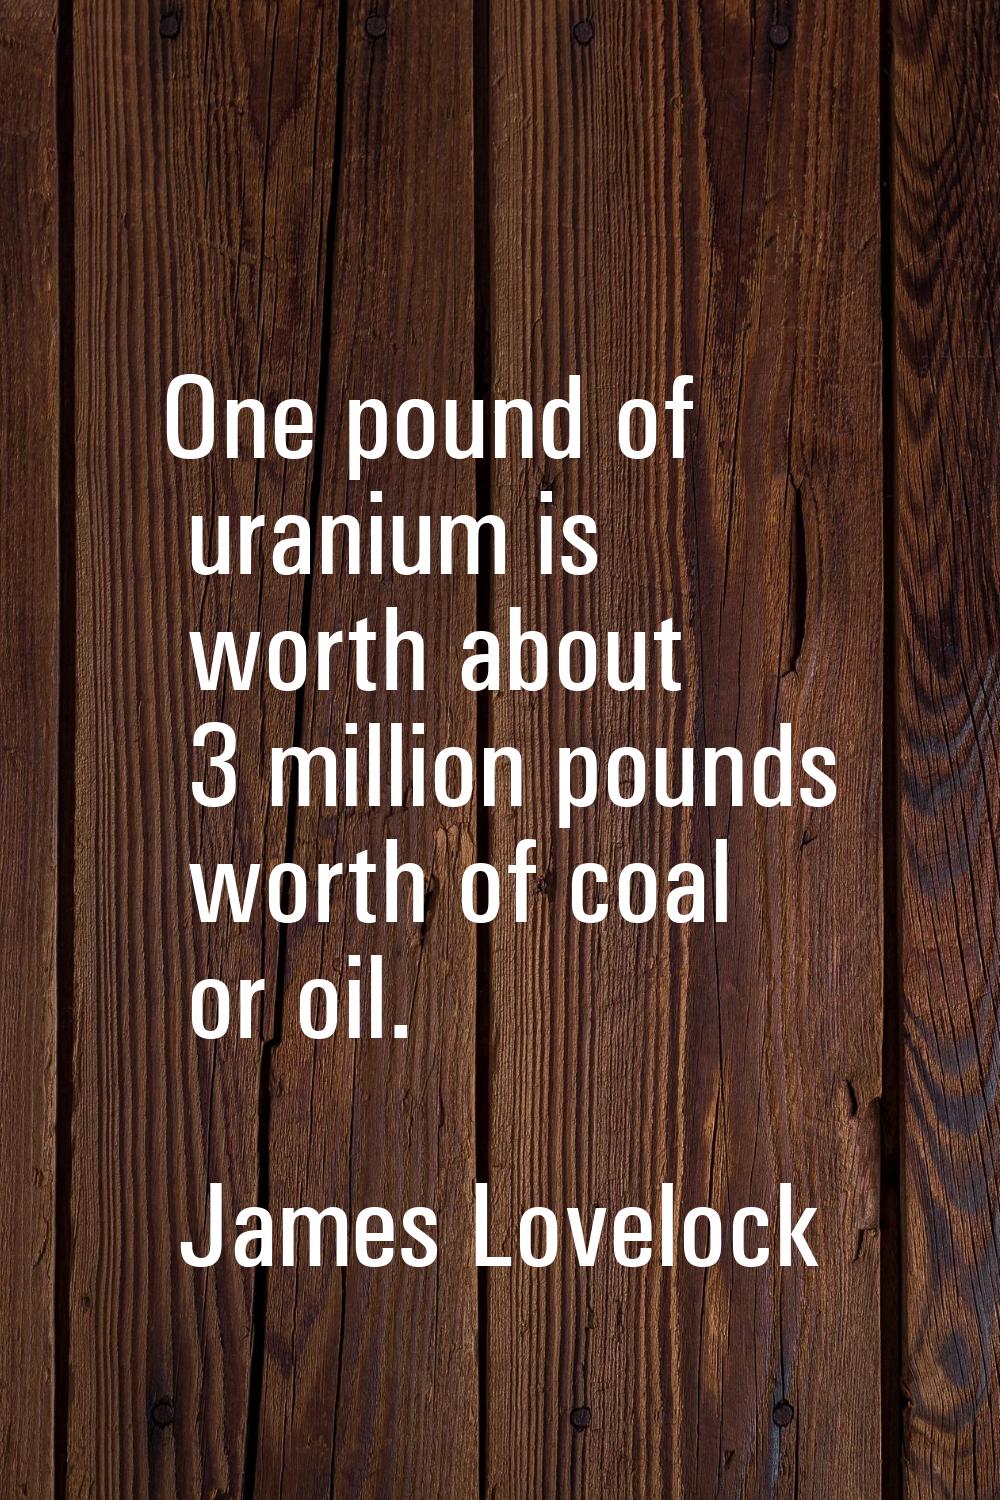 One pound of uranium is worth about 3 million pounds worth of coal or oil.